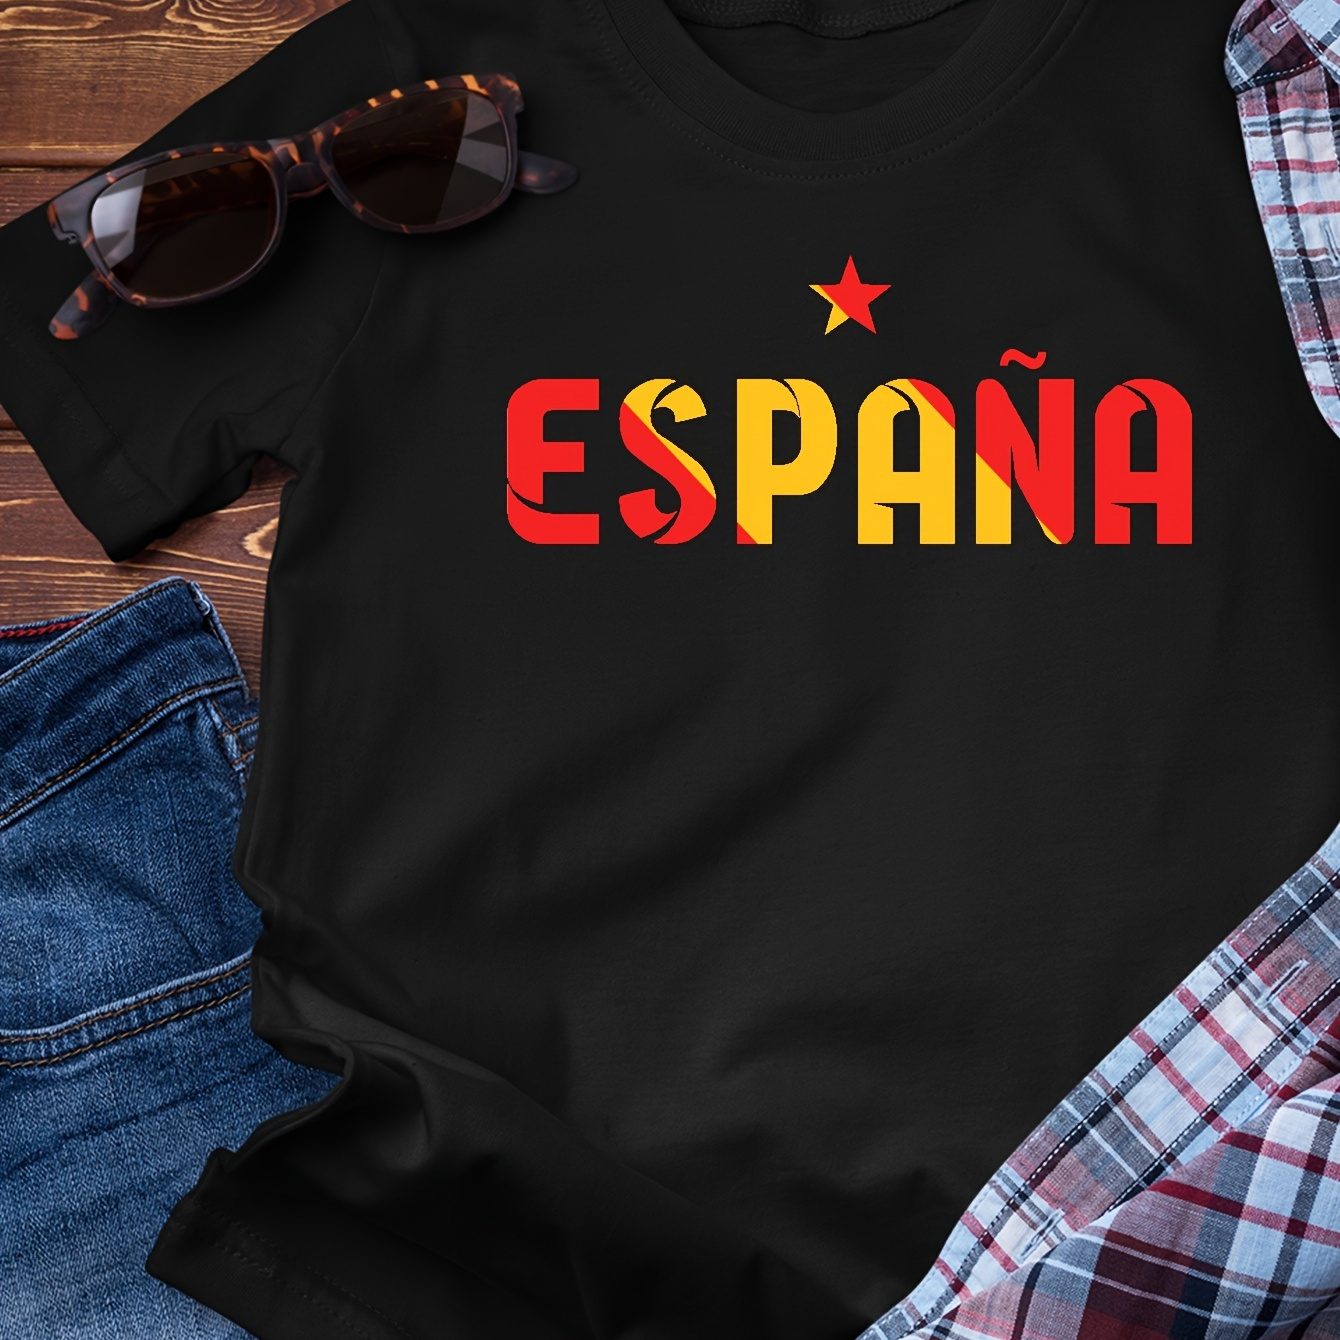 

Espana Letter Print Men's Crew Neck Short Sleeve Tees, Pure Cotton T-shirt, Casual Comfortable Lightweight Top For Summer